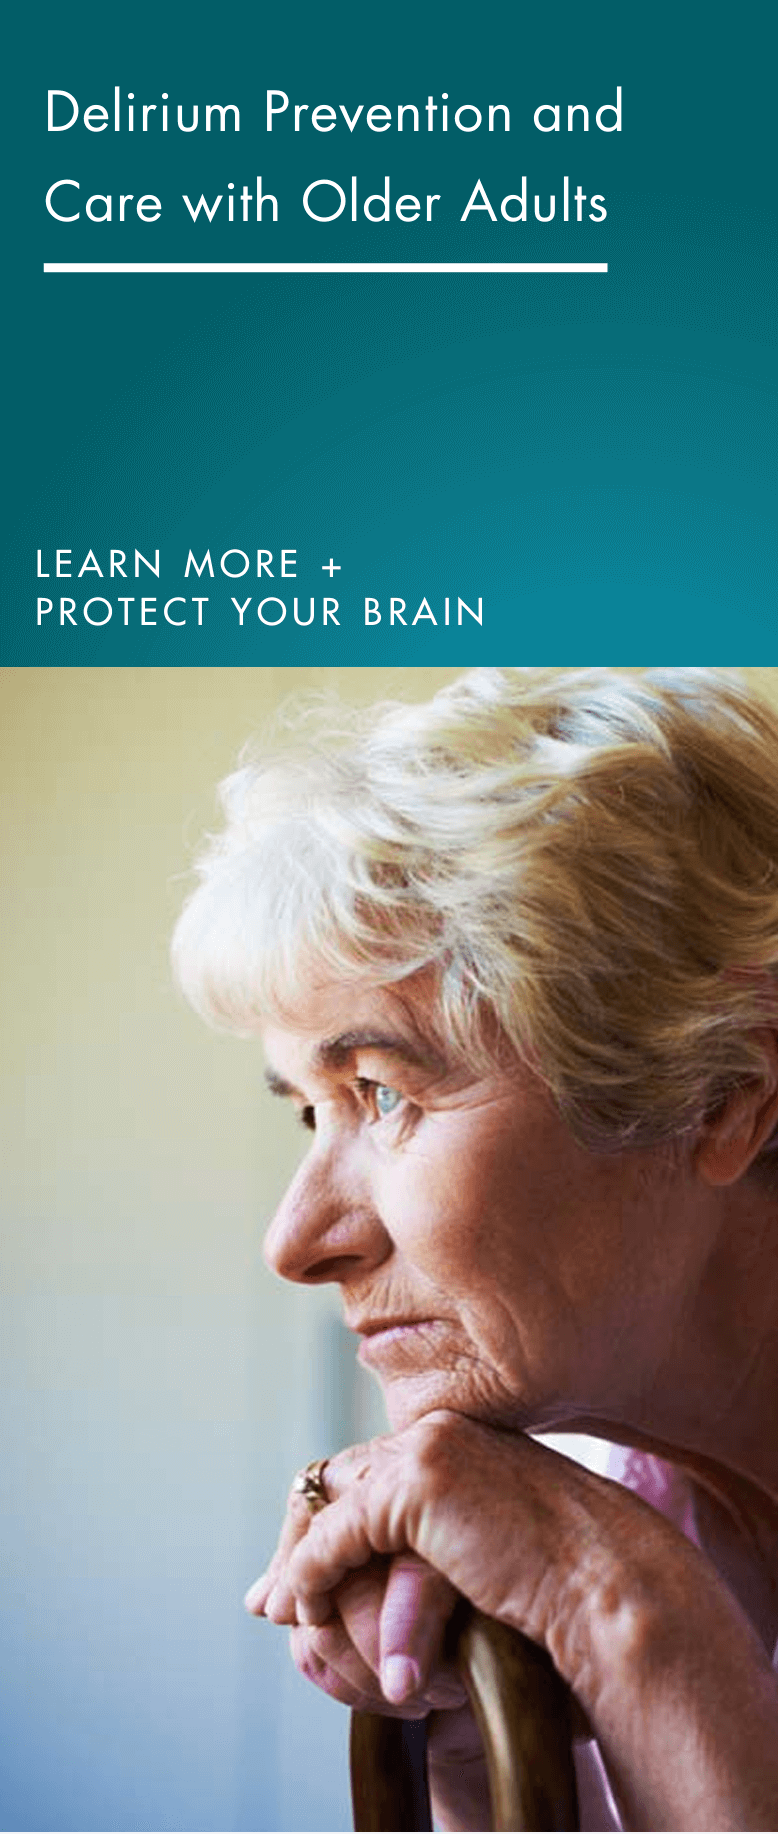 Cover for the Delirium Prevention and Care Pamphlet with a photo of an older woman looking thoughtful with there chin resting on their folded hands.